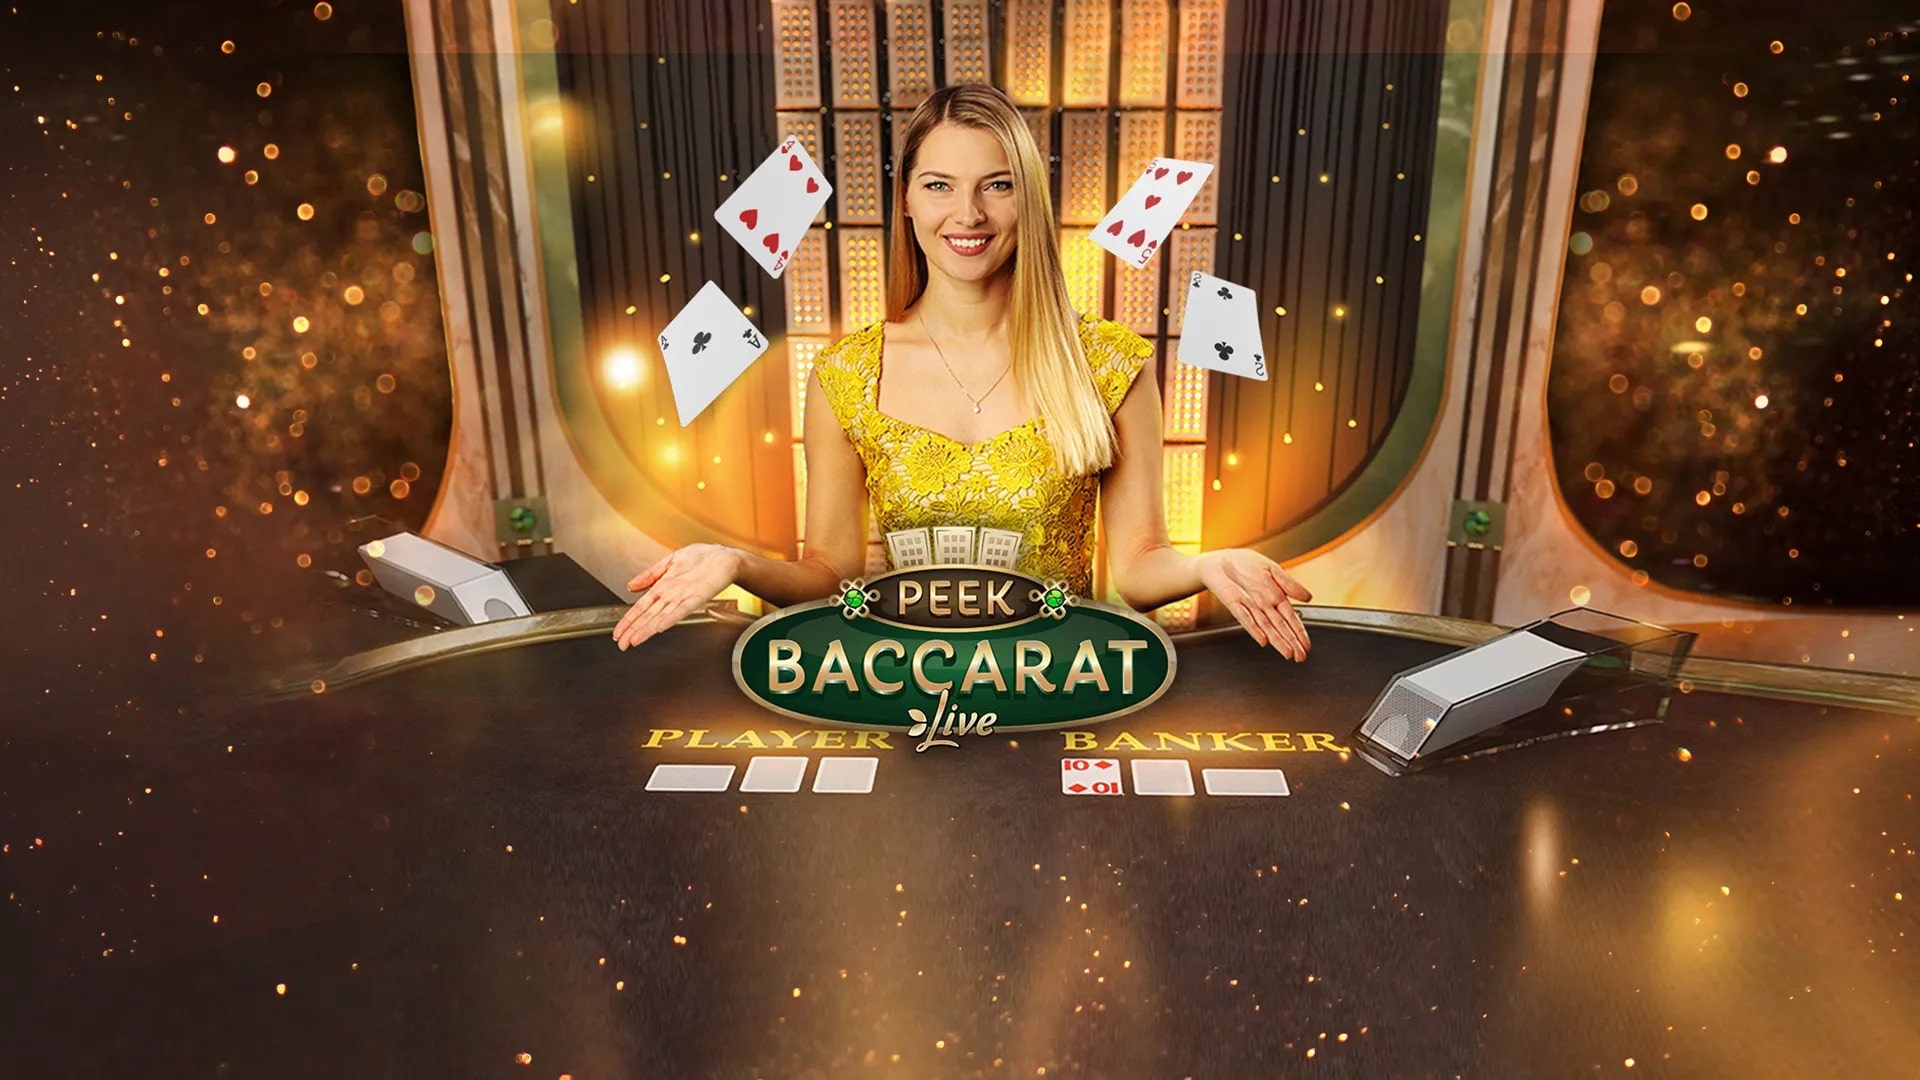 A Guide to Peek Baccarat